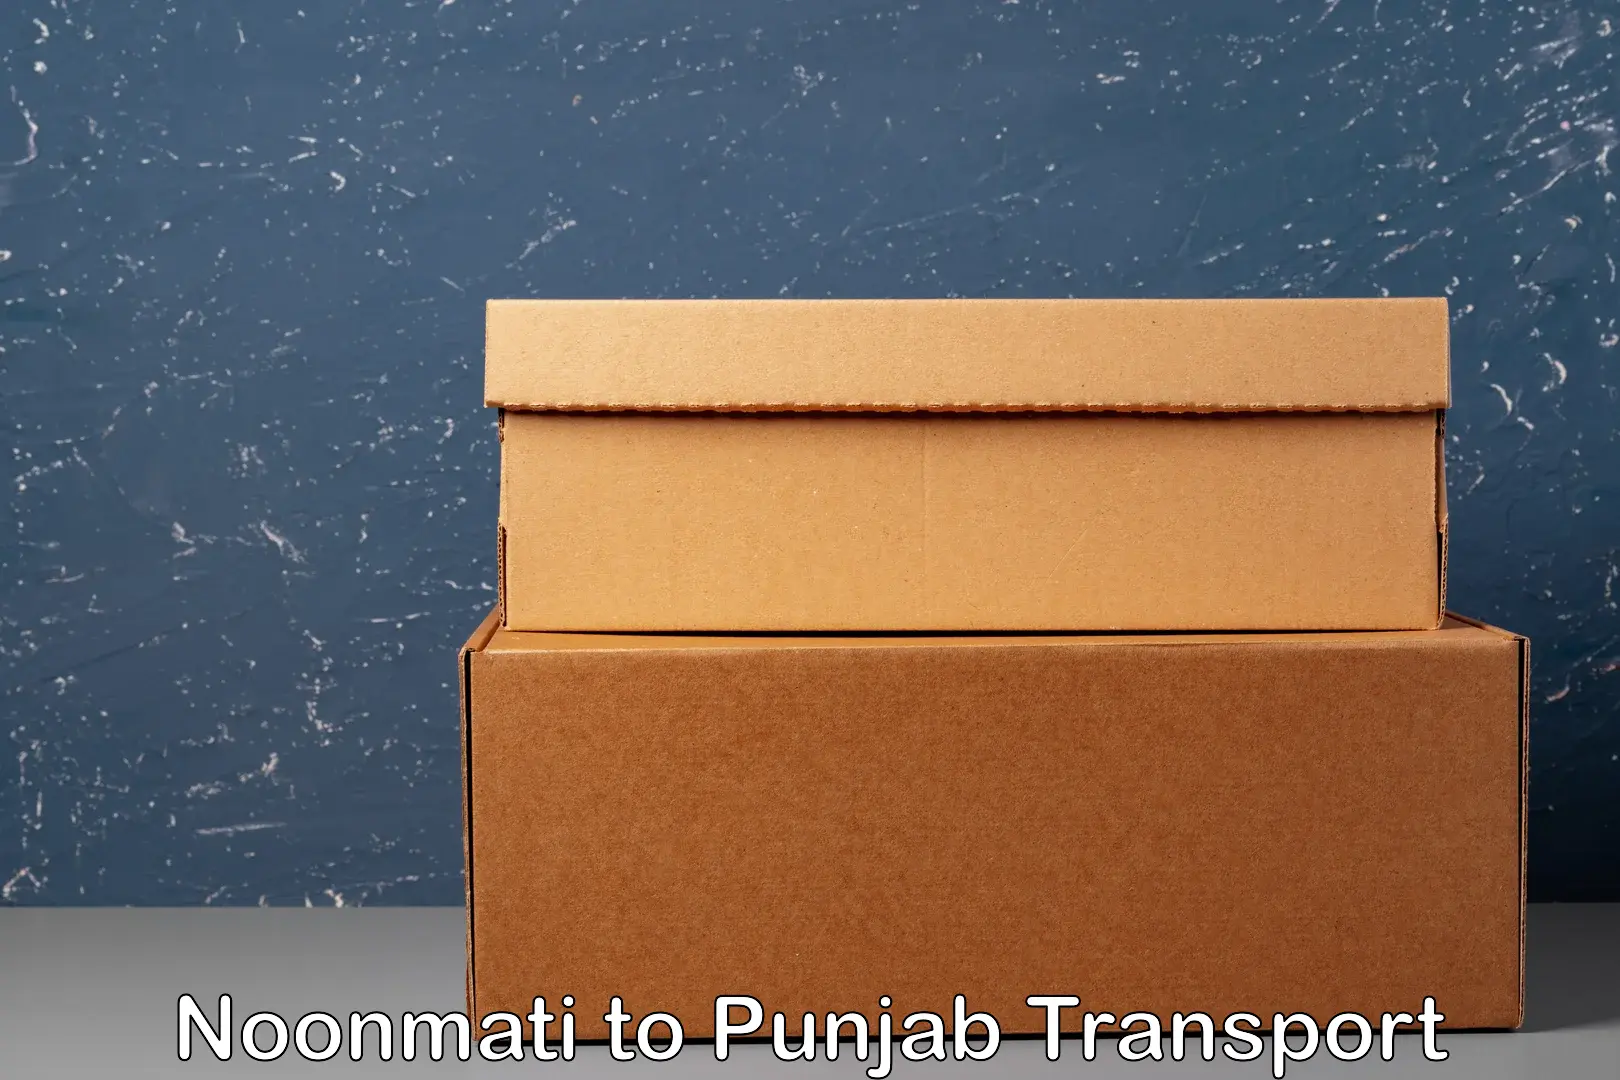 Package delivery services Noonmati to Punjab